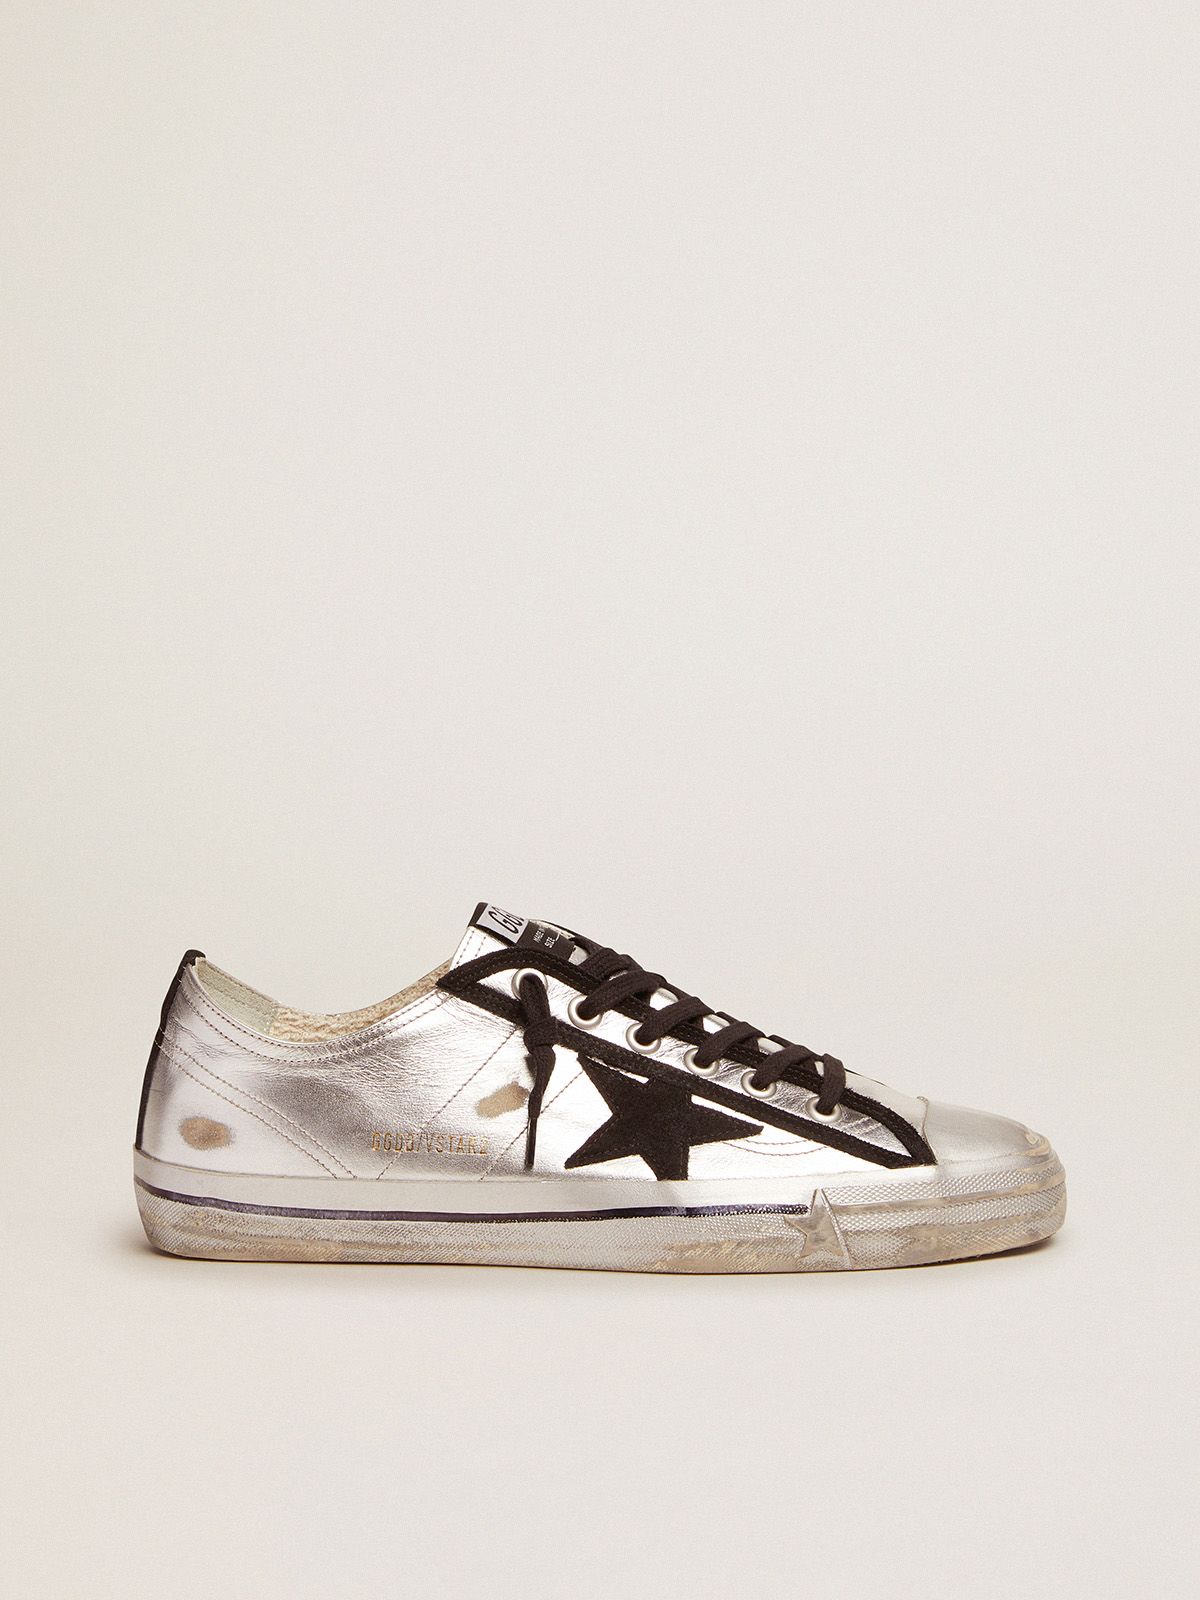 golden goose sneakers black V-Star suede laminated leather in details silver with